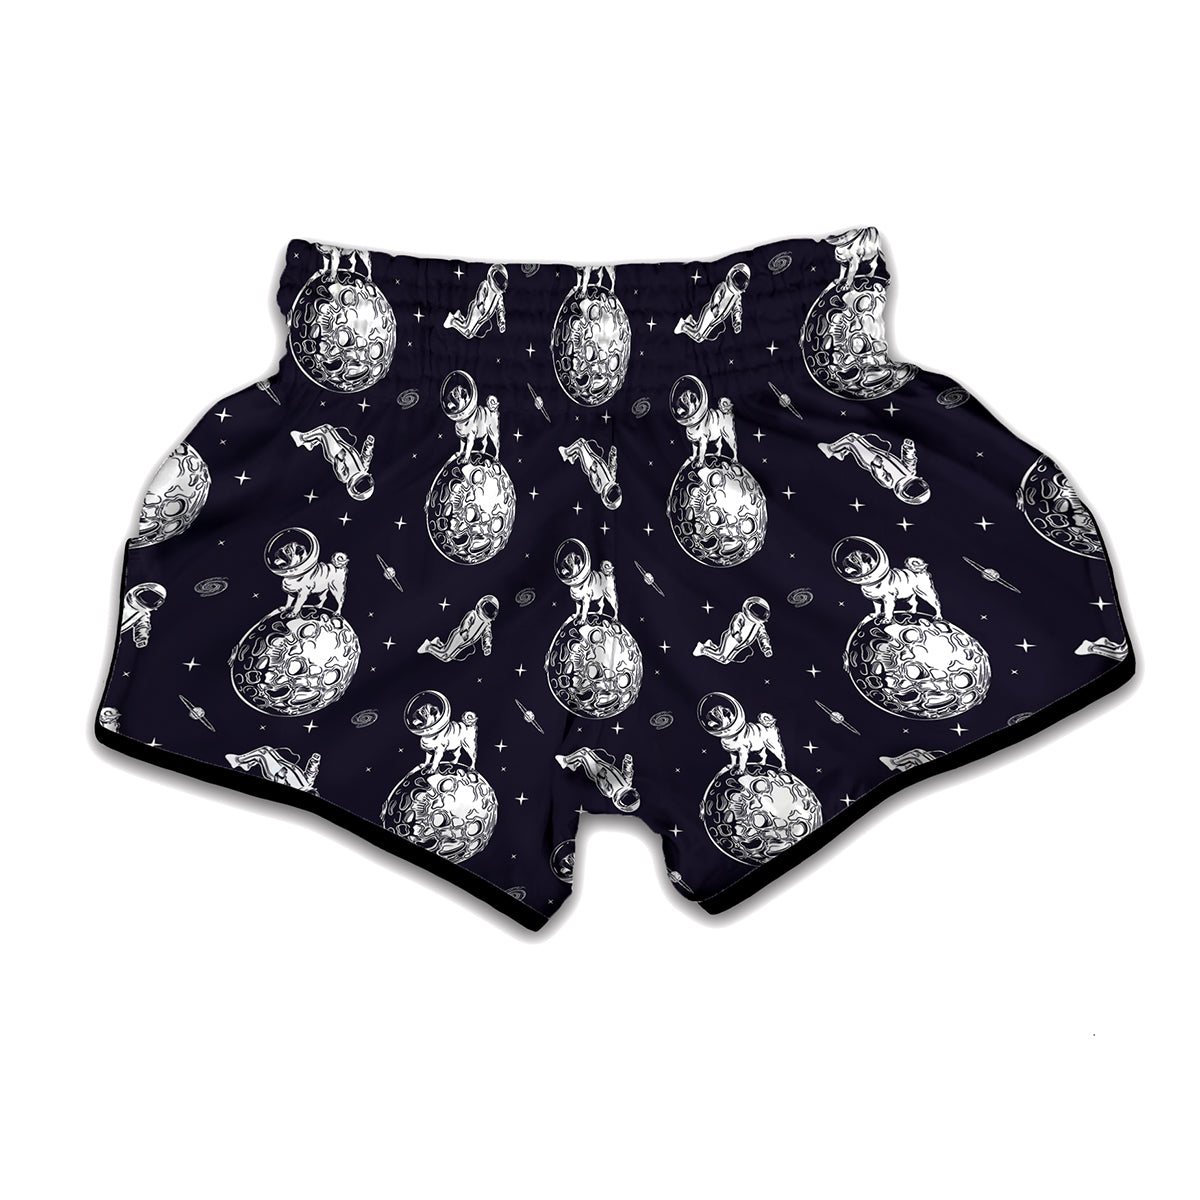 Astronaut Pug In Space Pattern Print Muay Thai Boxing Shorts